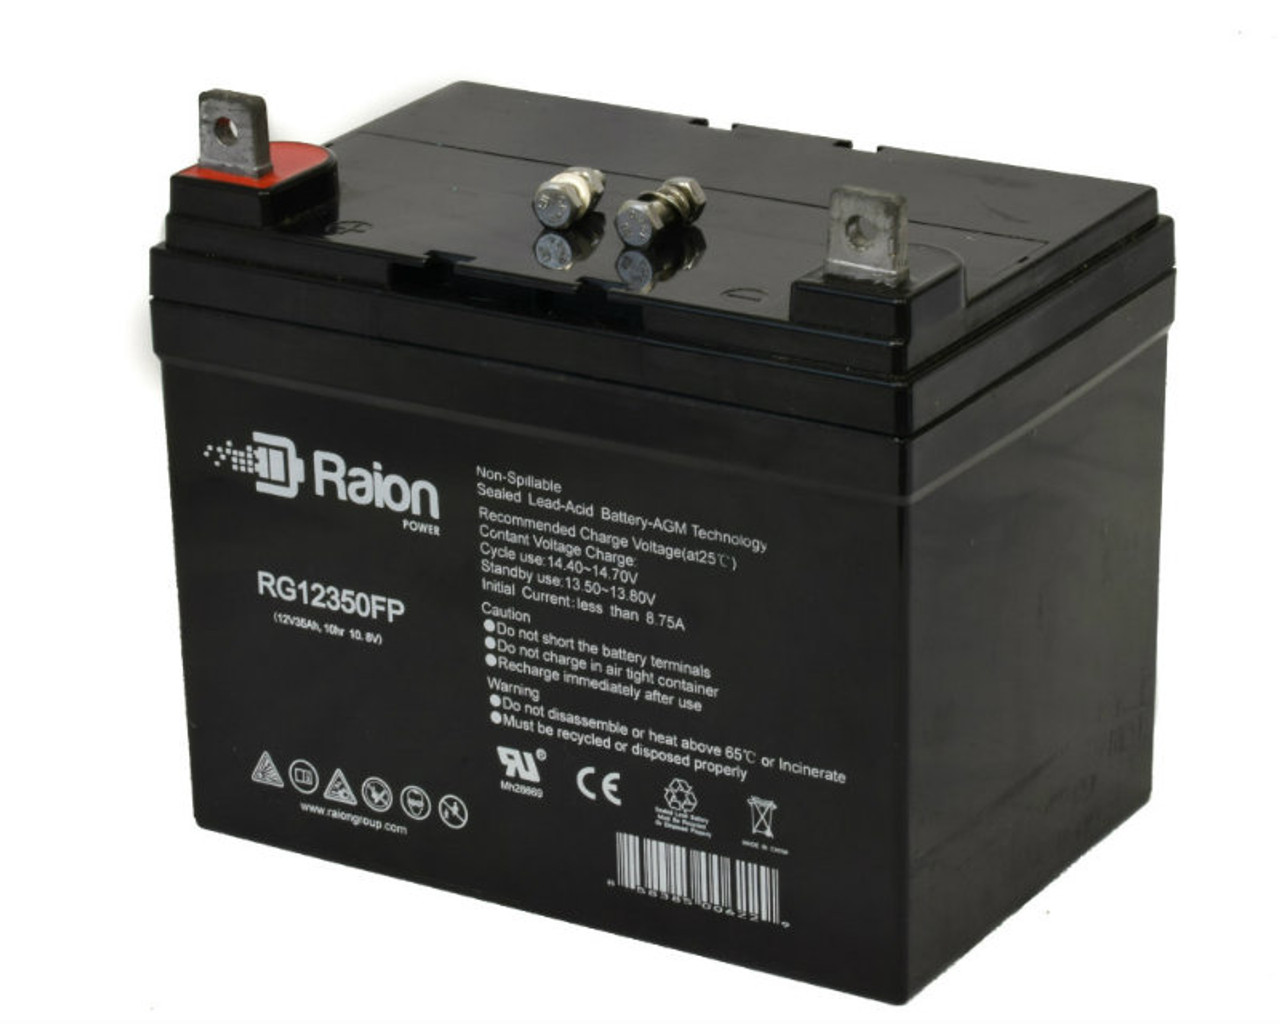 Raion Power Replacement 12V 35Ah RG12350FP Mobility Scooter Battery for Pihsiang Wheelchair 109101-88104-36L